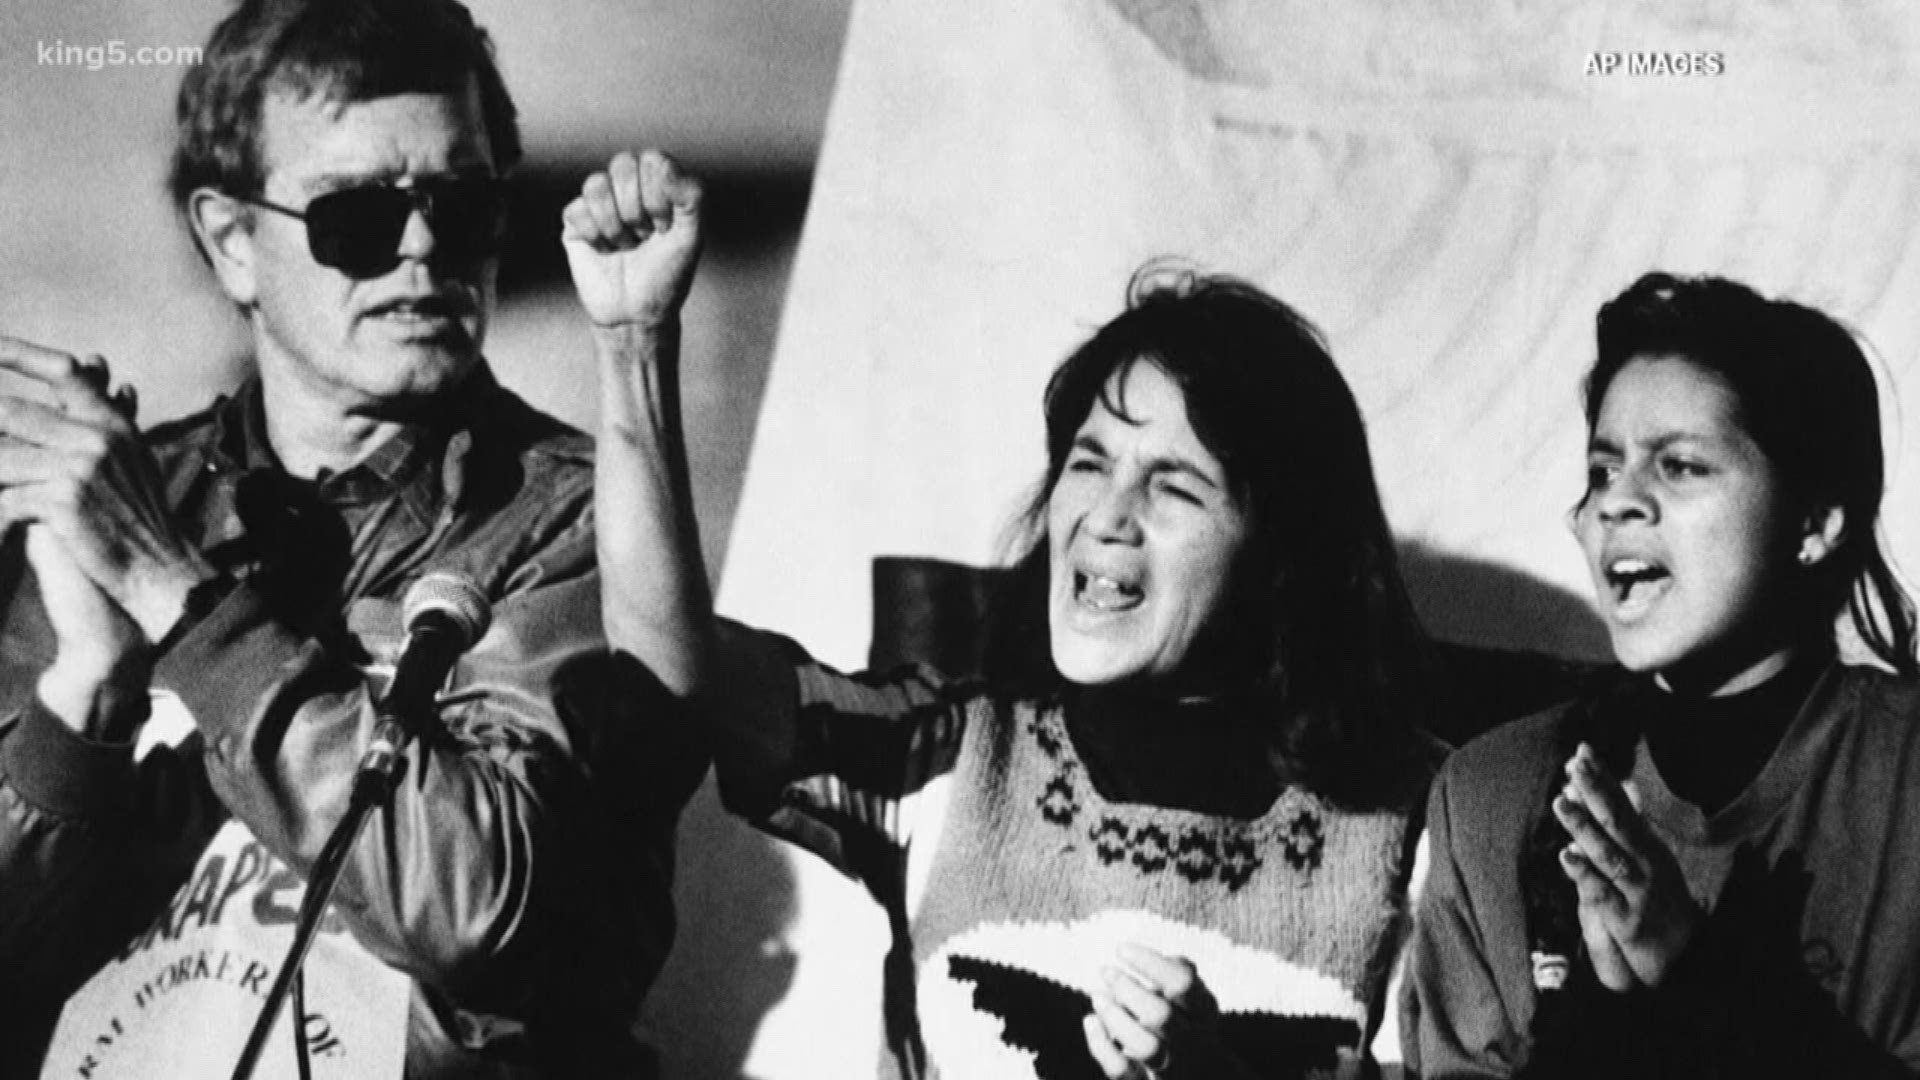 Governor Inslee signed legislation setting April 10th as Dolores Huerta Day. She is considered one of the most influential activists in American History.